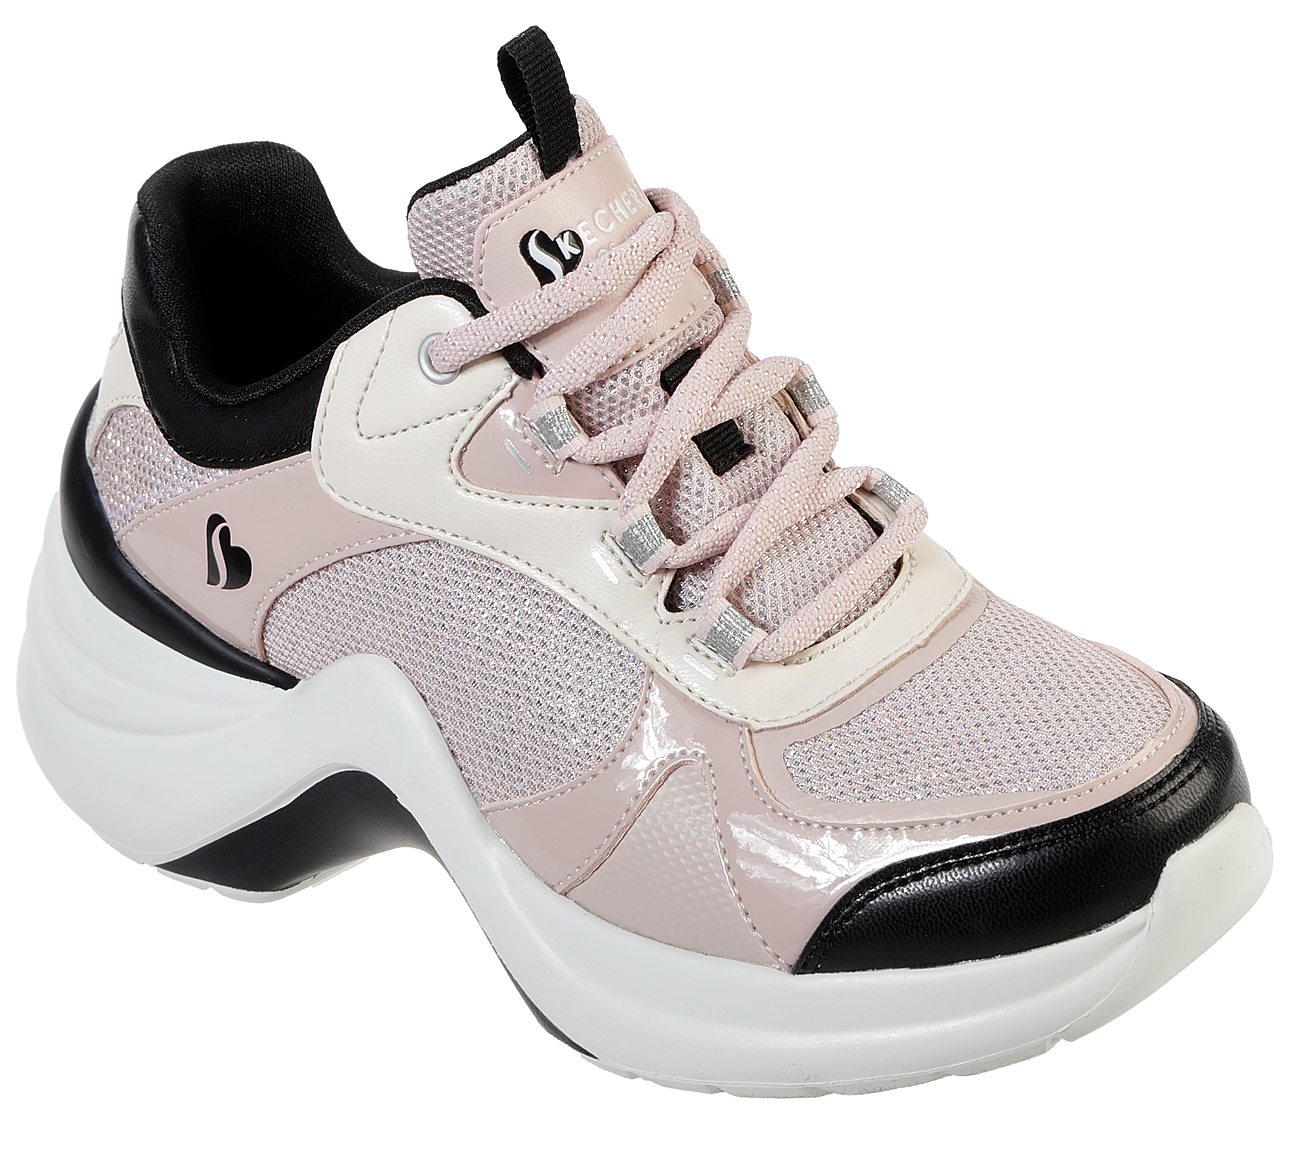 SOLEI ST.-GROOVILICIOUS, PINK/BLACK Footwear Lateral View